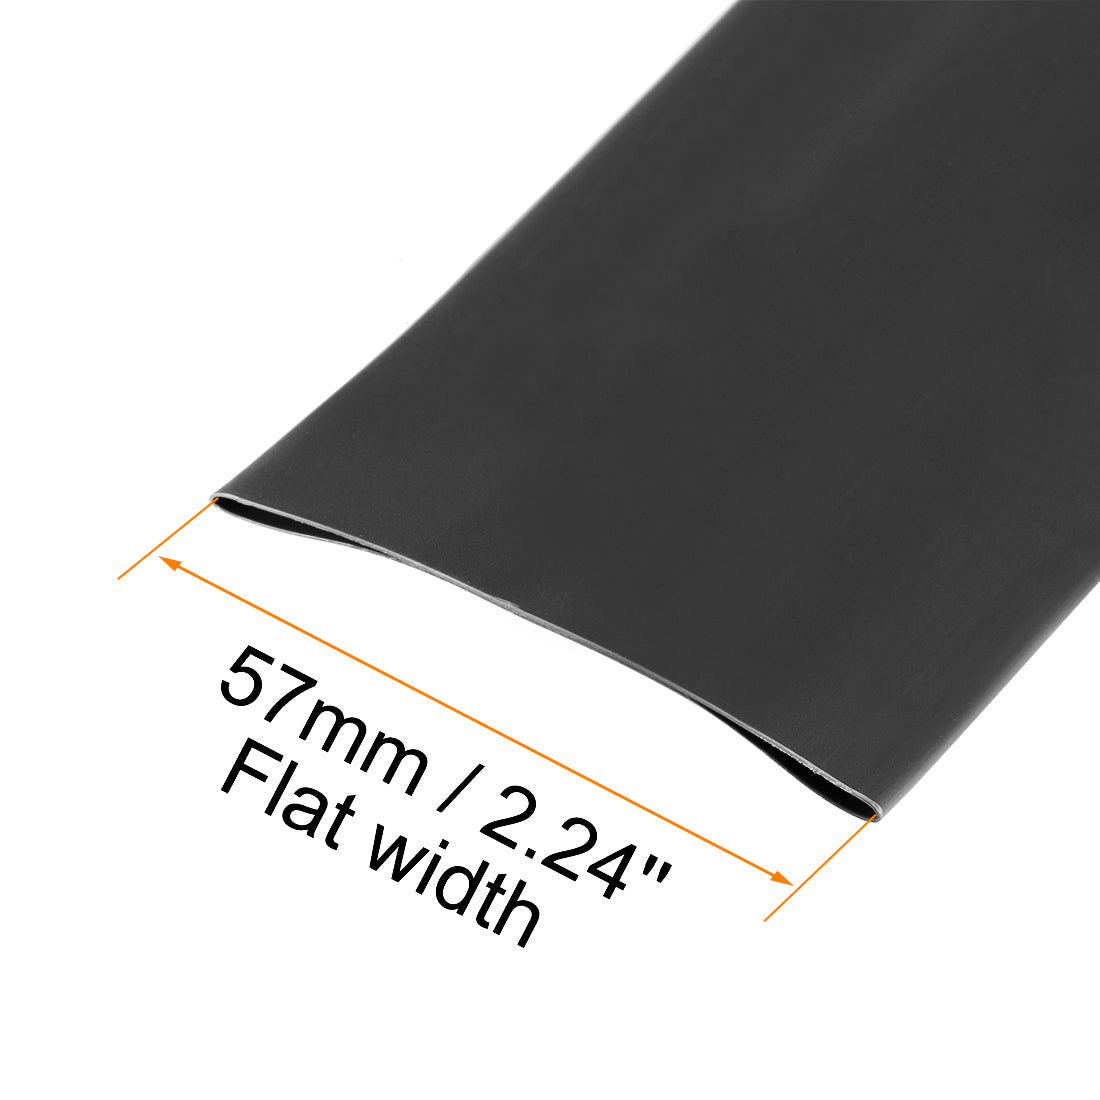 uxcell Uxcell Heat Shrink Tubing, 1-3/8"(35mm) Dia 57mm Flat Width 2:1 rate 1m - Black